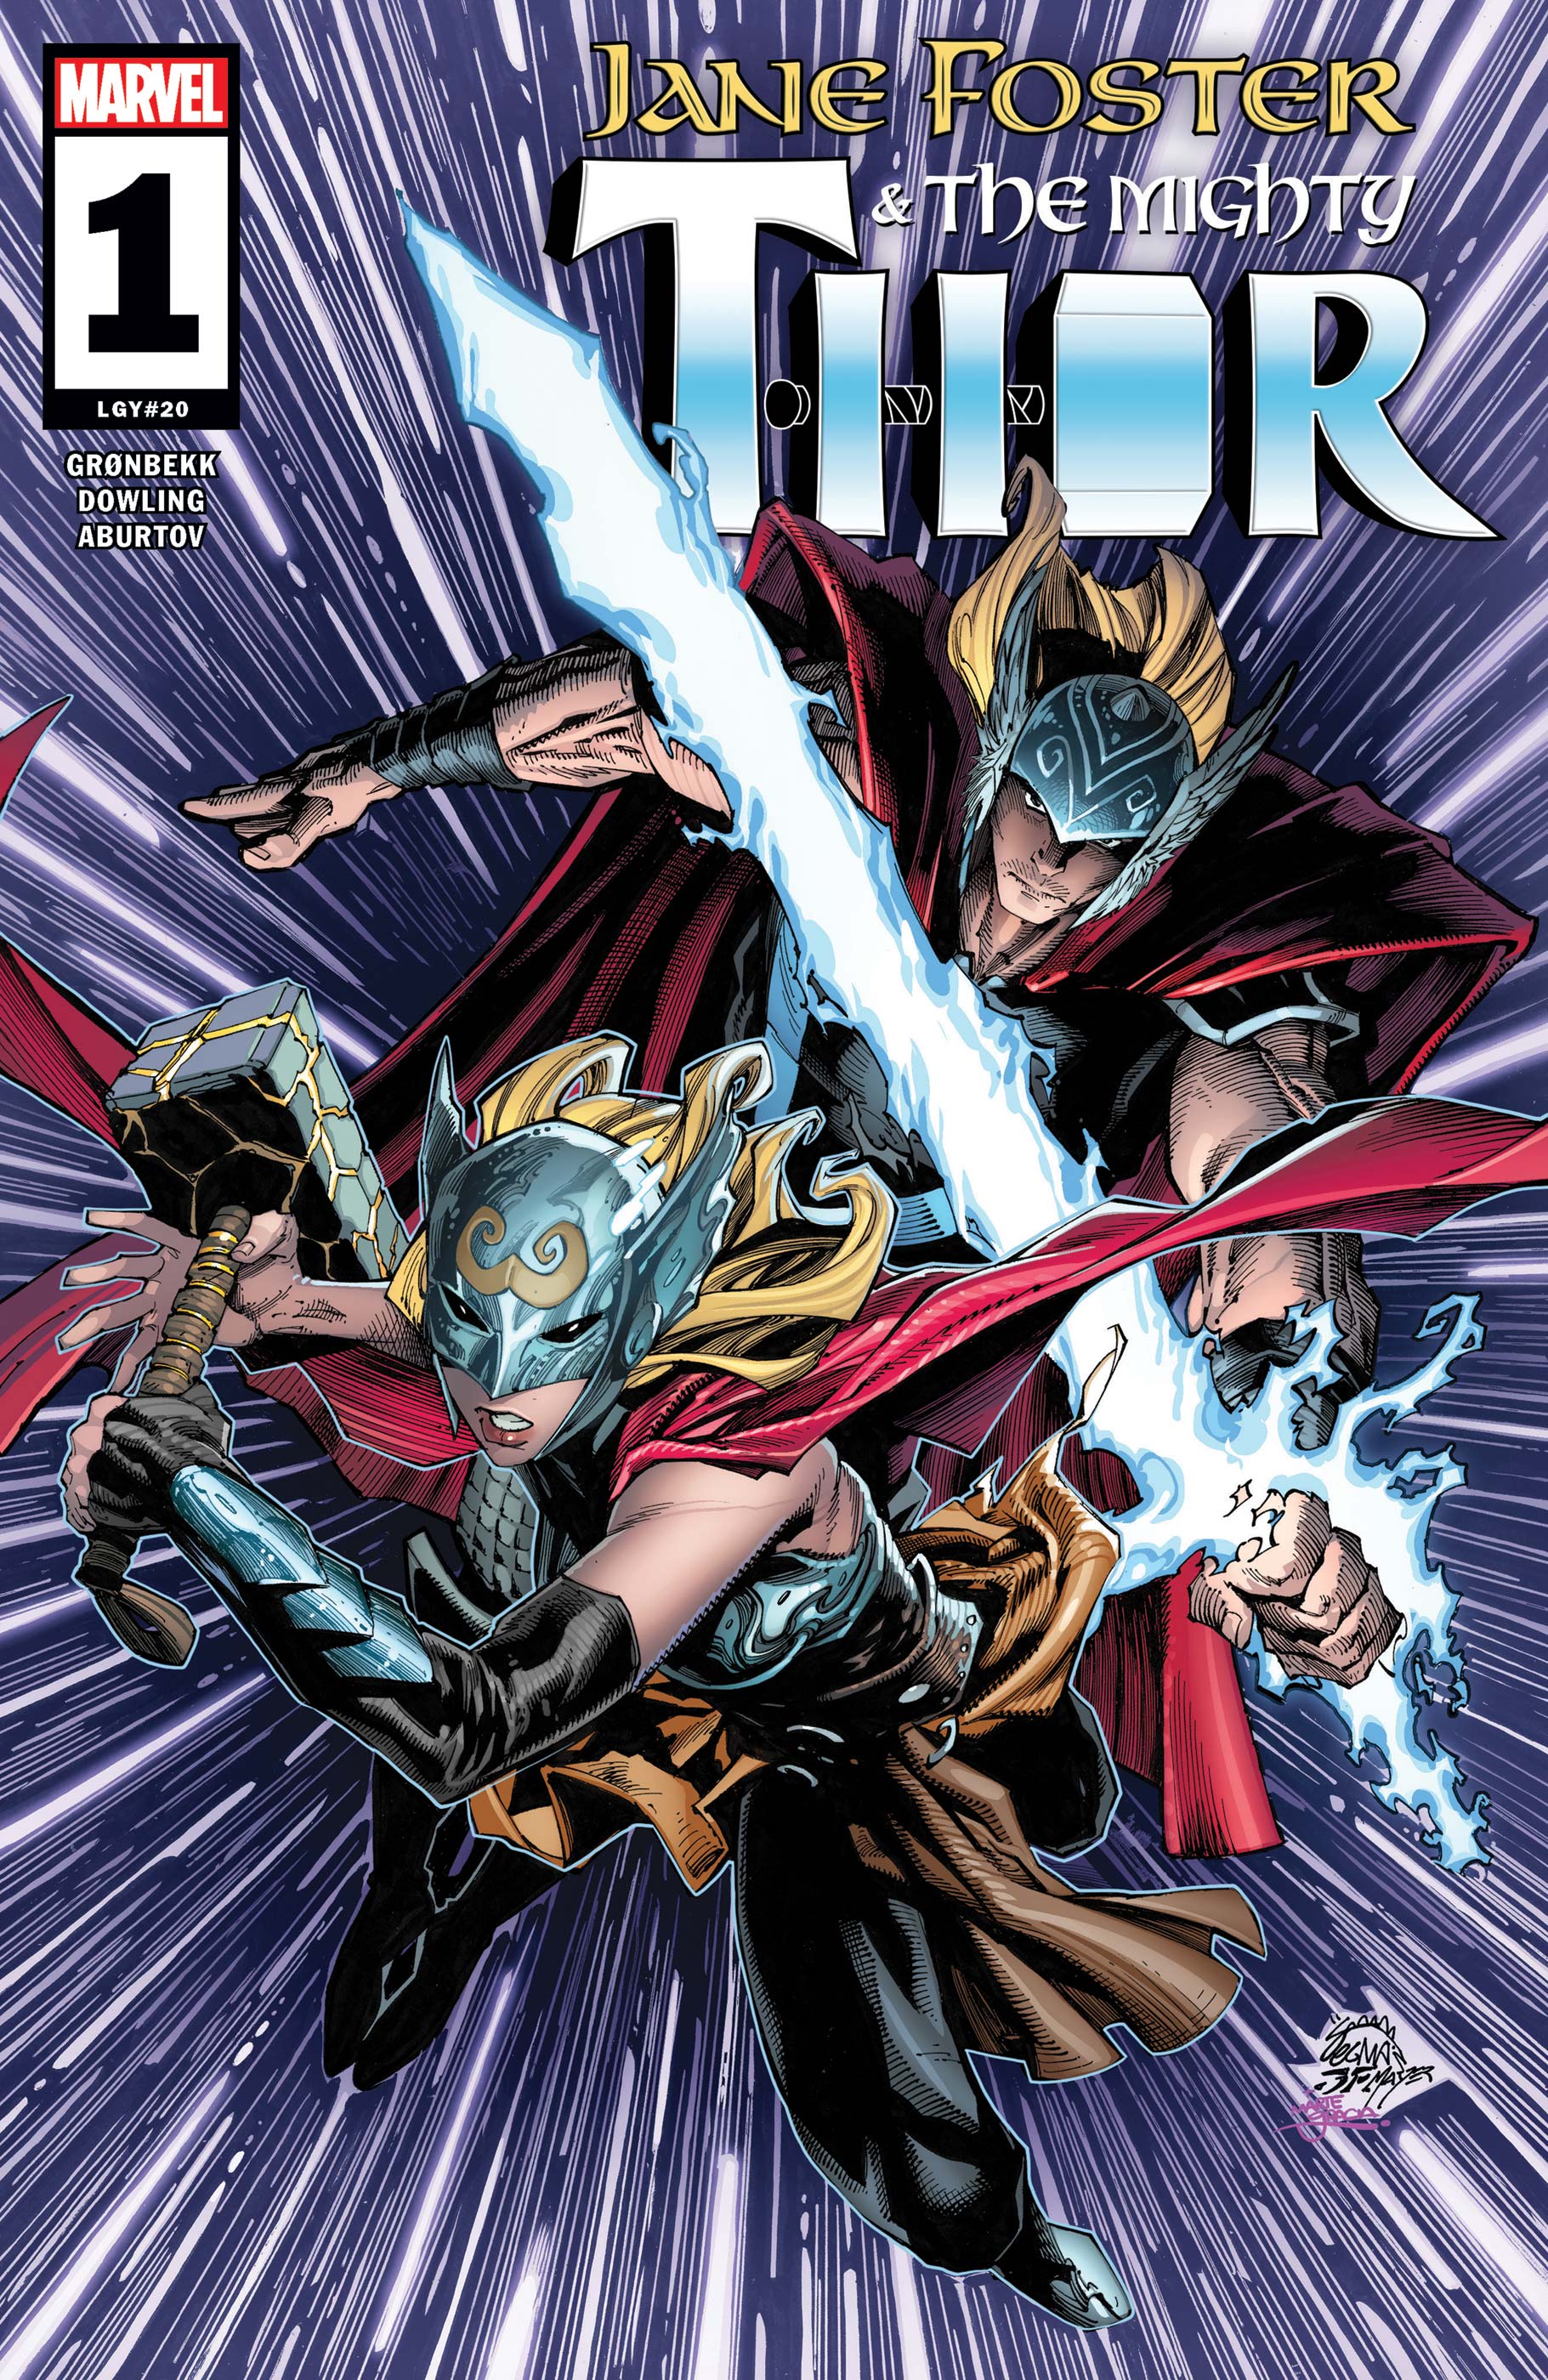 Jane Foster & The Mighty Thor #1 (Of 5)